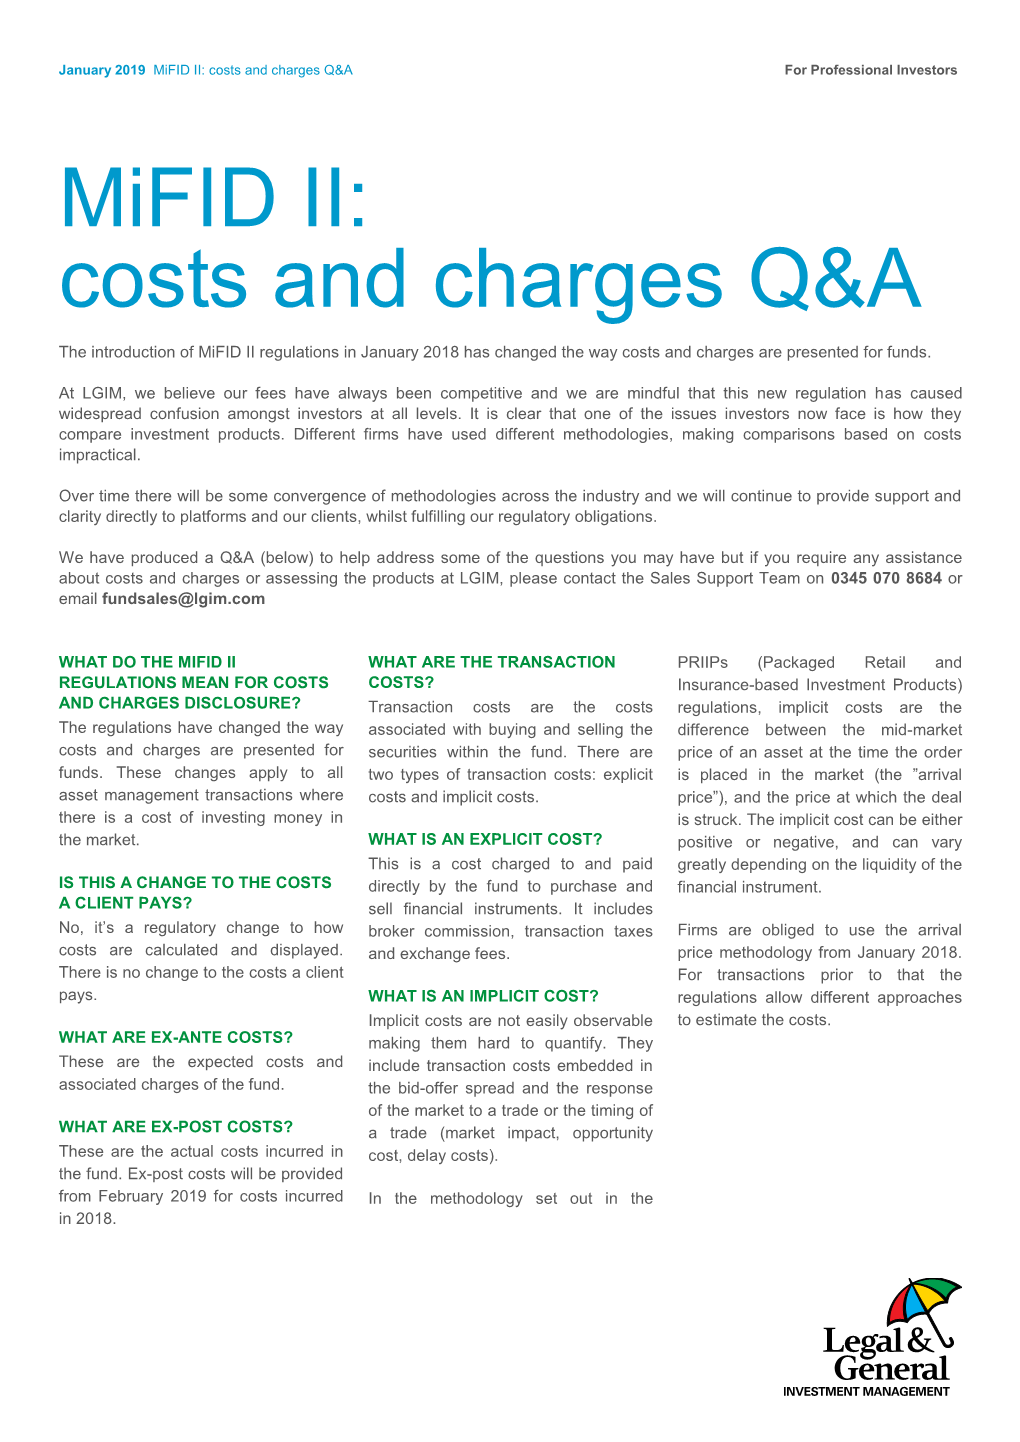 Mifid II Costs and Charges Q&A Legal & General Investment Management